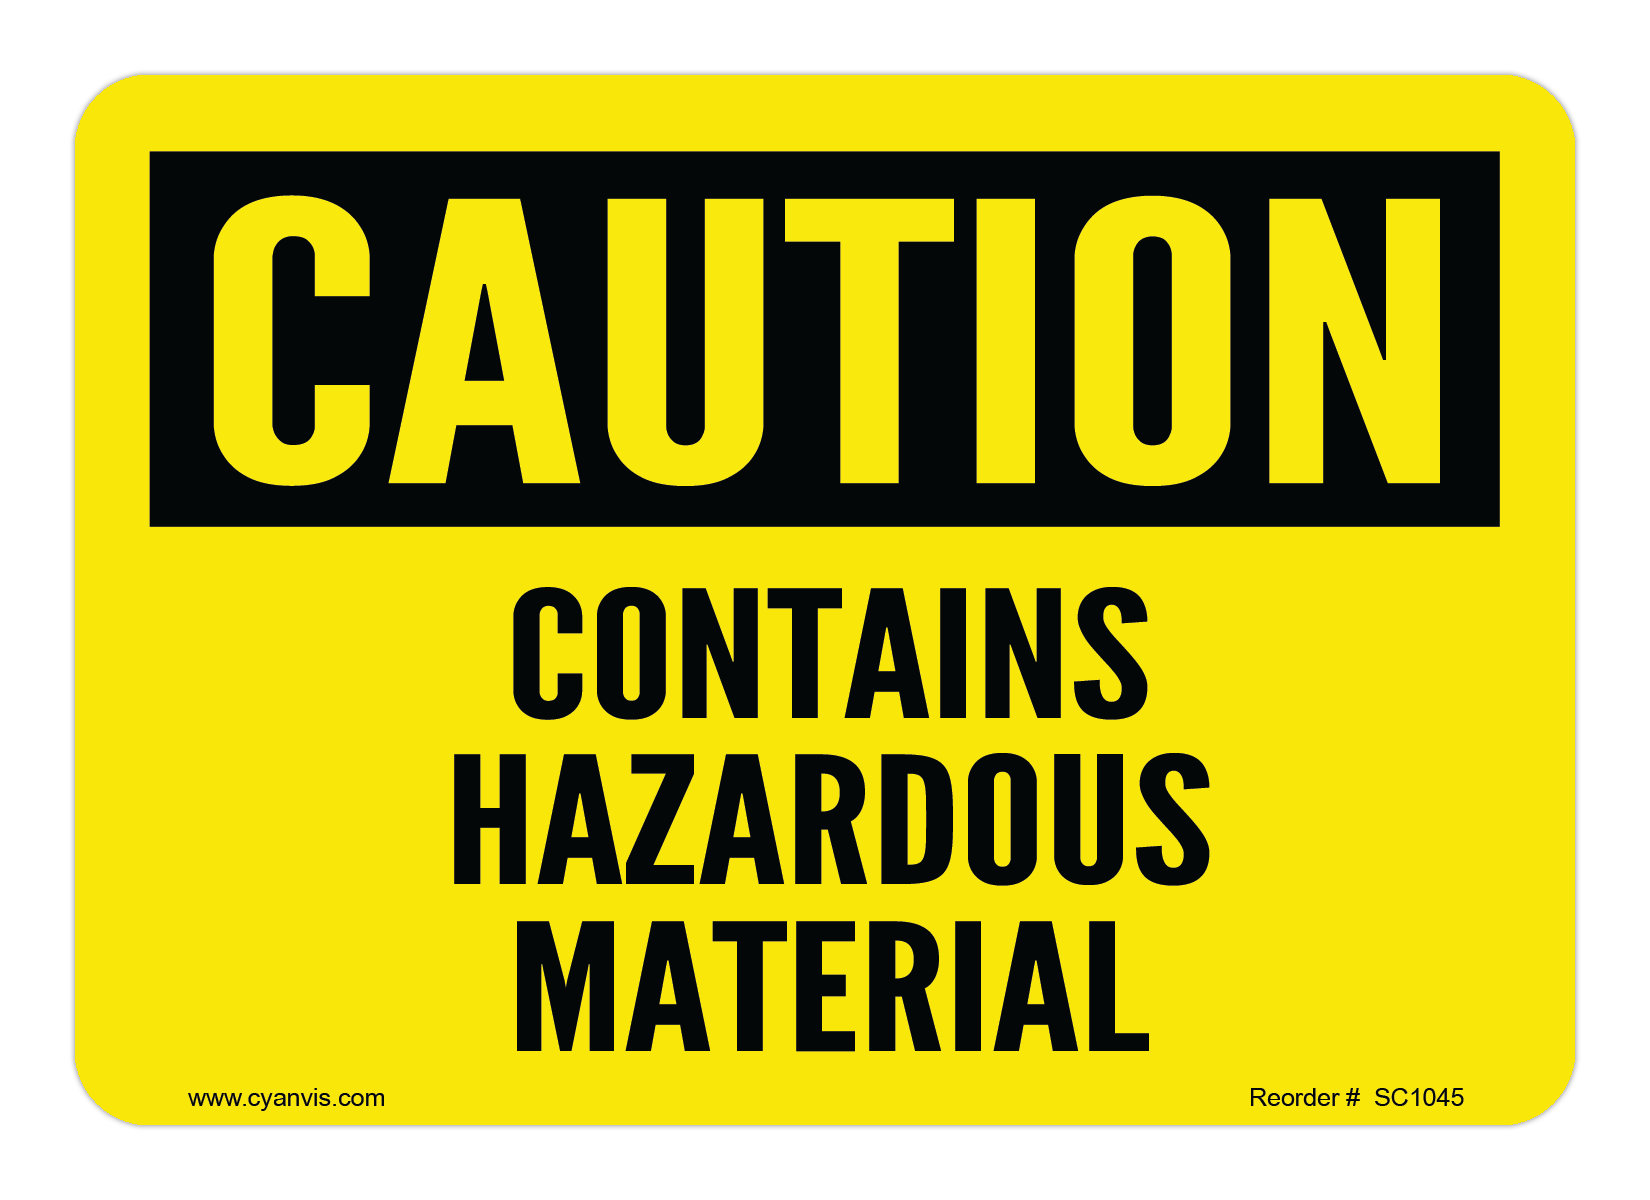 Safety Sign: Caution - CONTAINS HAZARDOUS MATERIAL - CYANvisuals